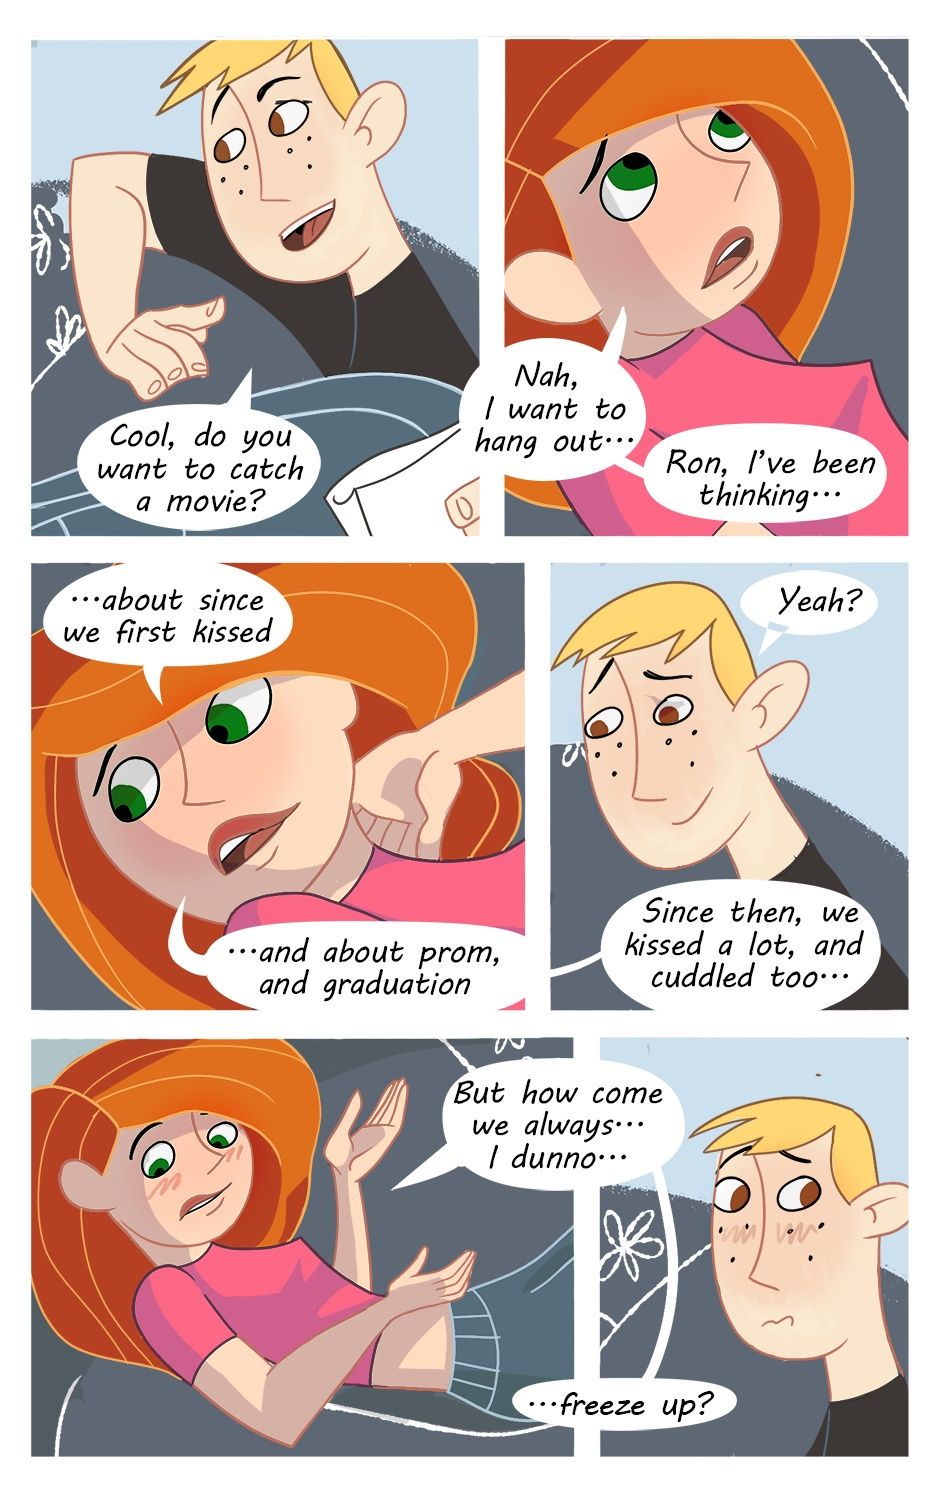 [Uanonkp] The Couch (Kim Possible) 2